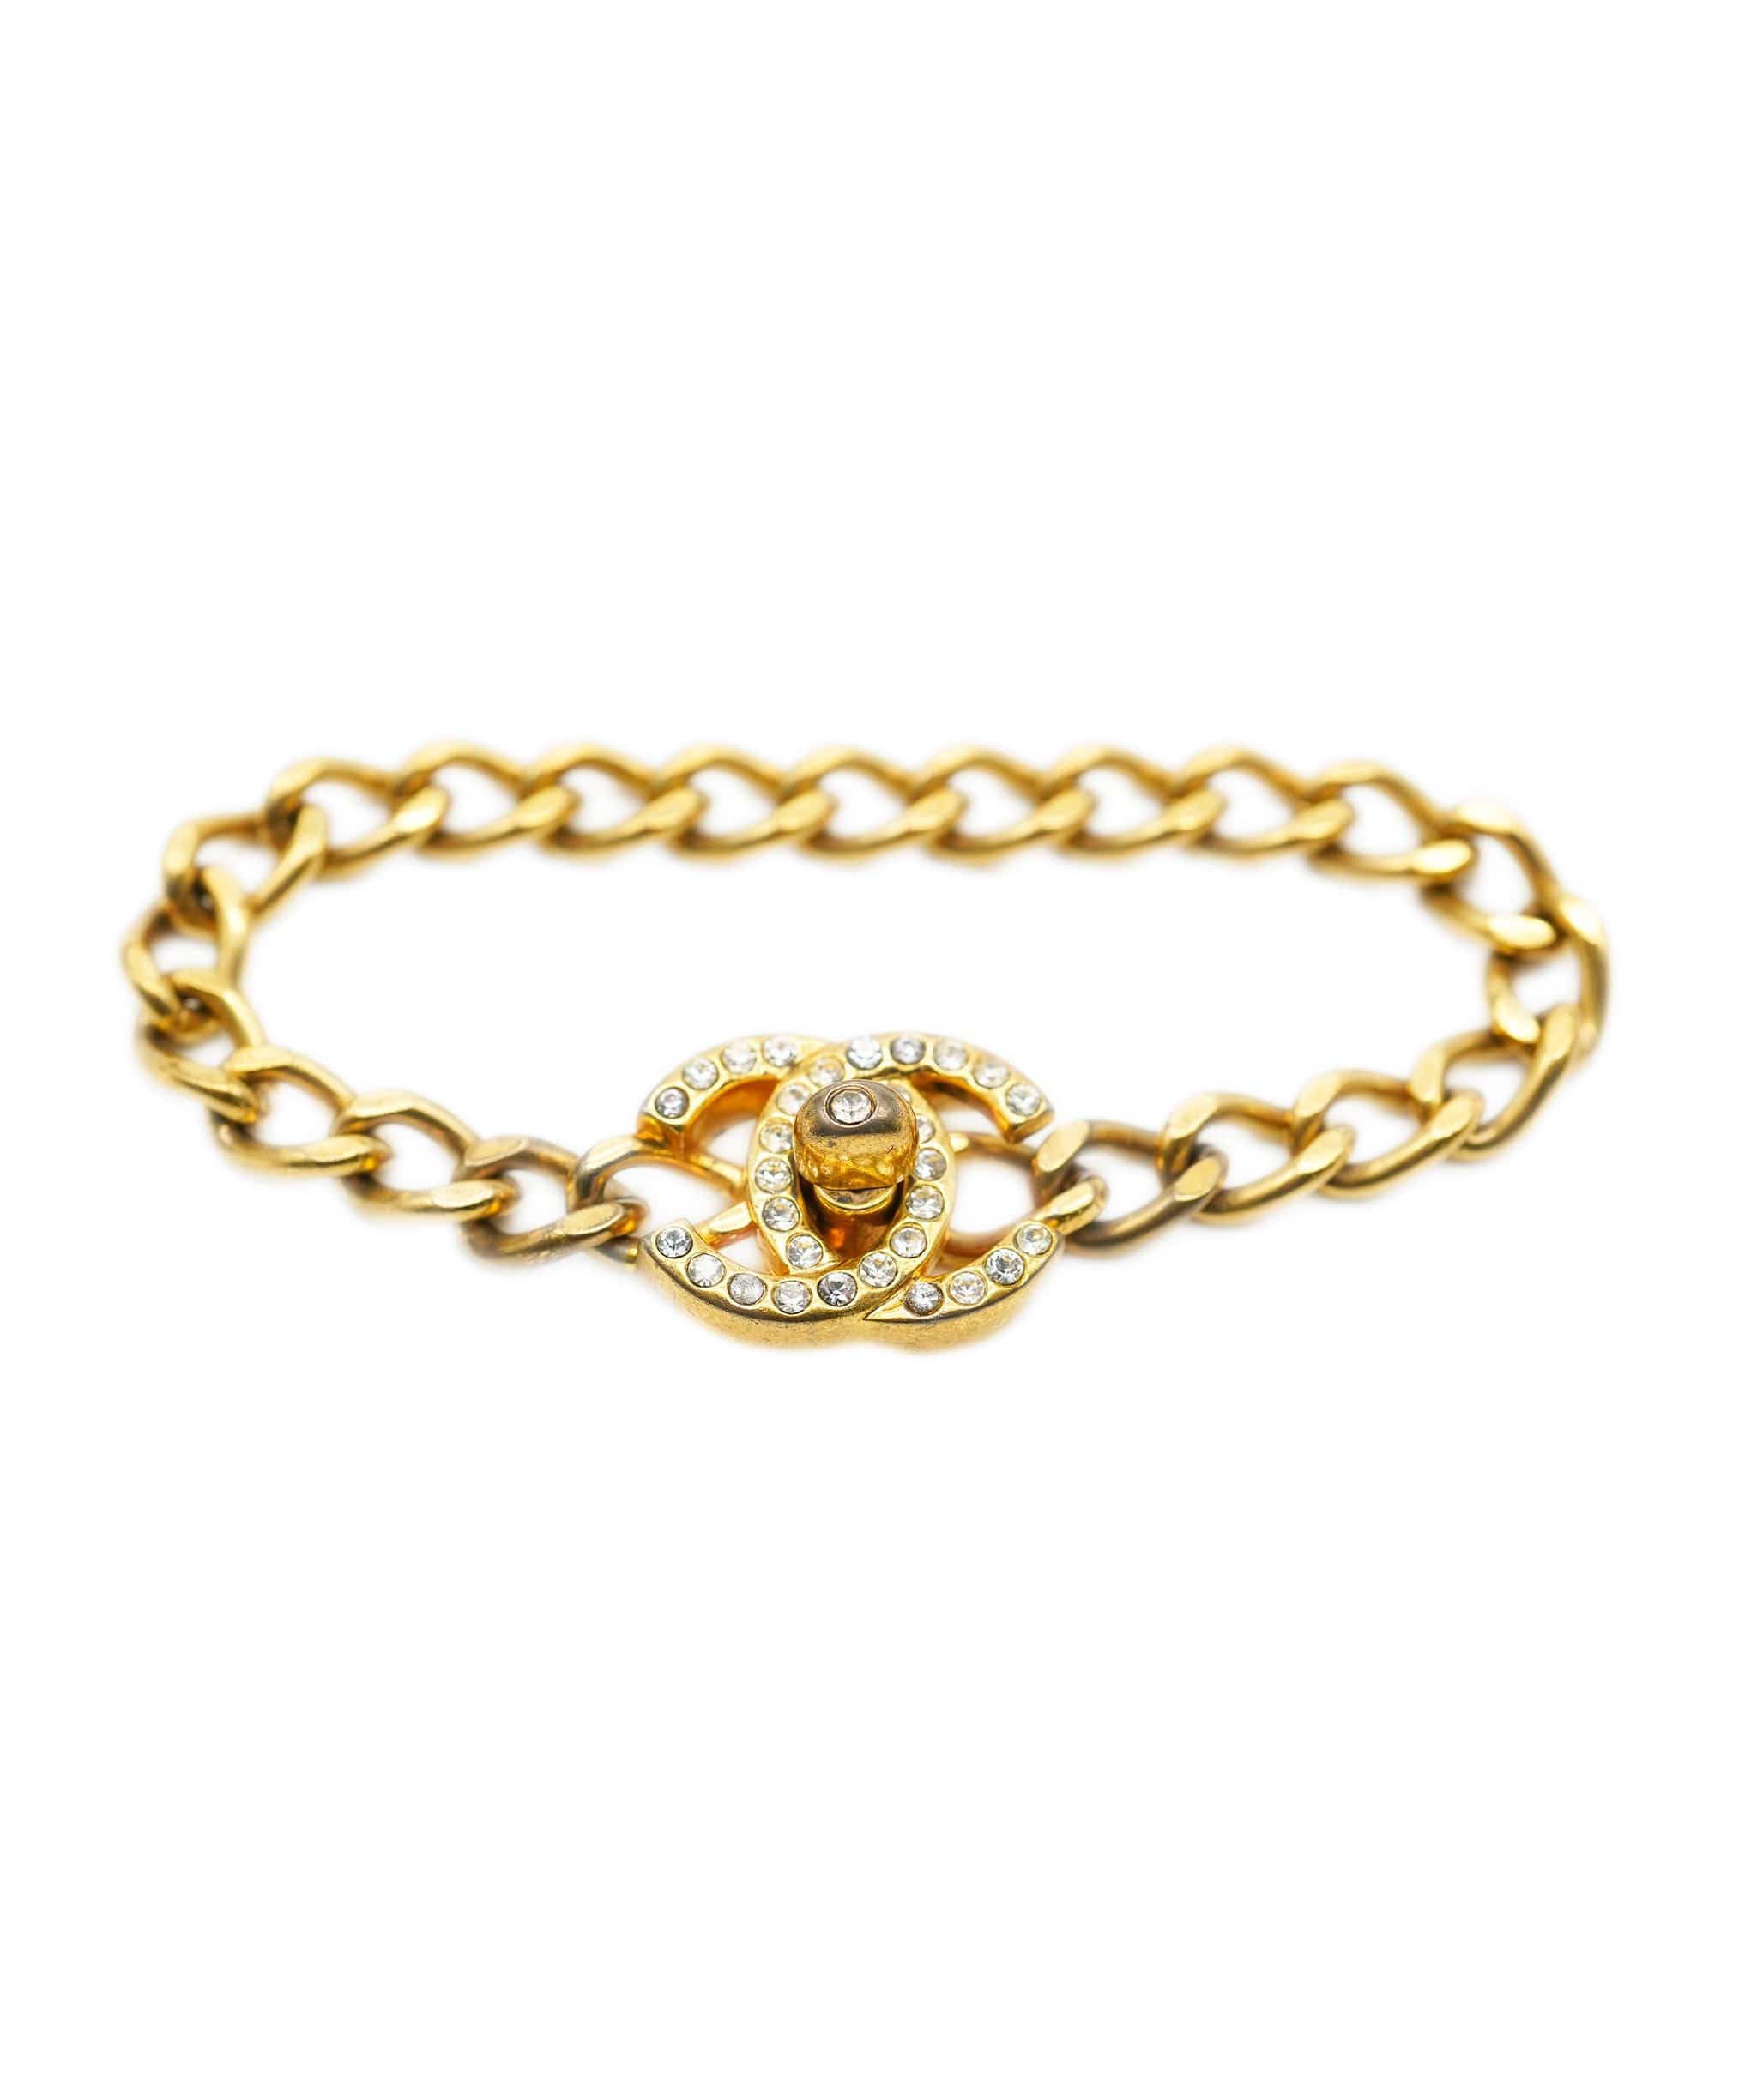 Chanel Vintage Chanel Gold Crystal CC Turnlock Chain Bracelet - AWL2438